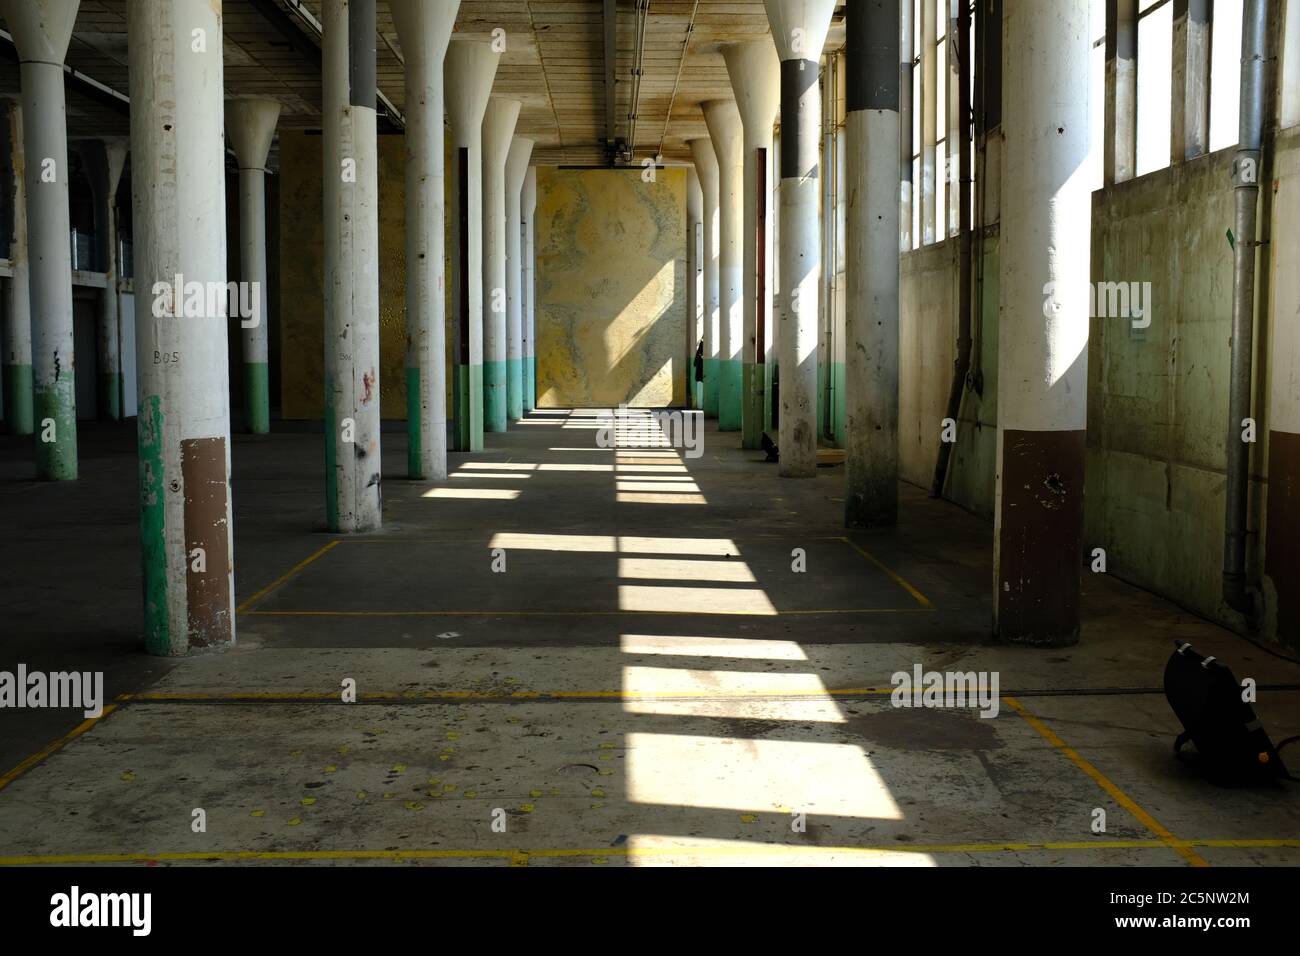 the interior of an abandoned industrial warehouse building on old industrial park called Hembrug in the netherlands Stock Photo